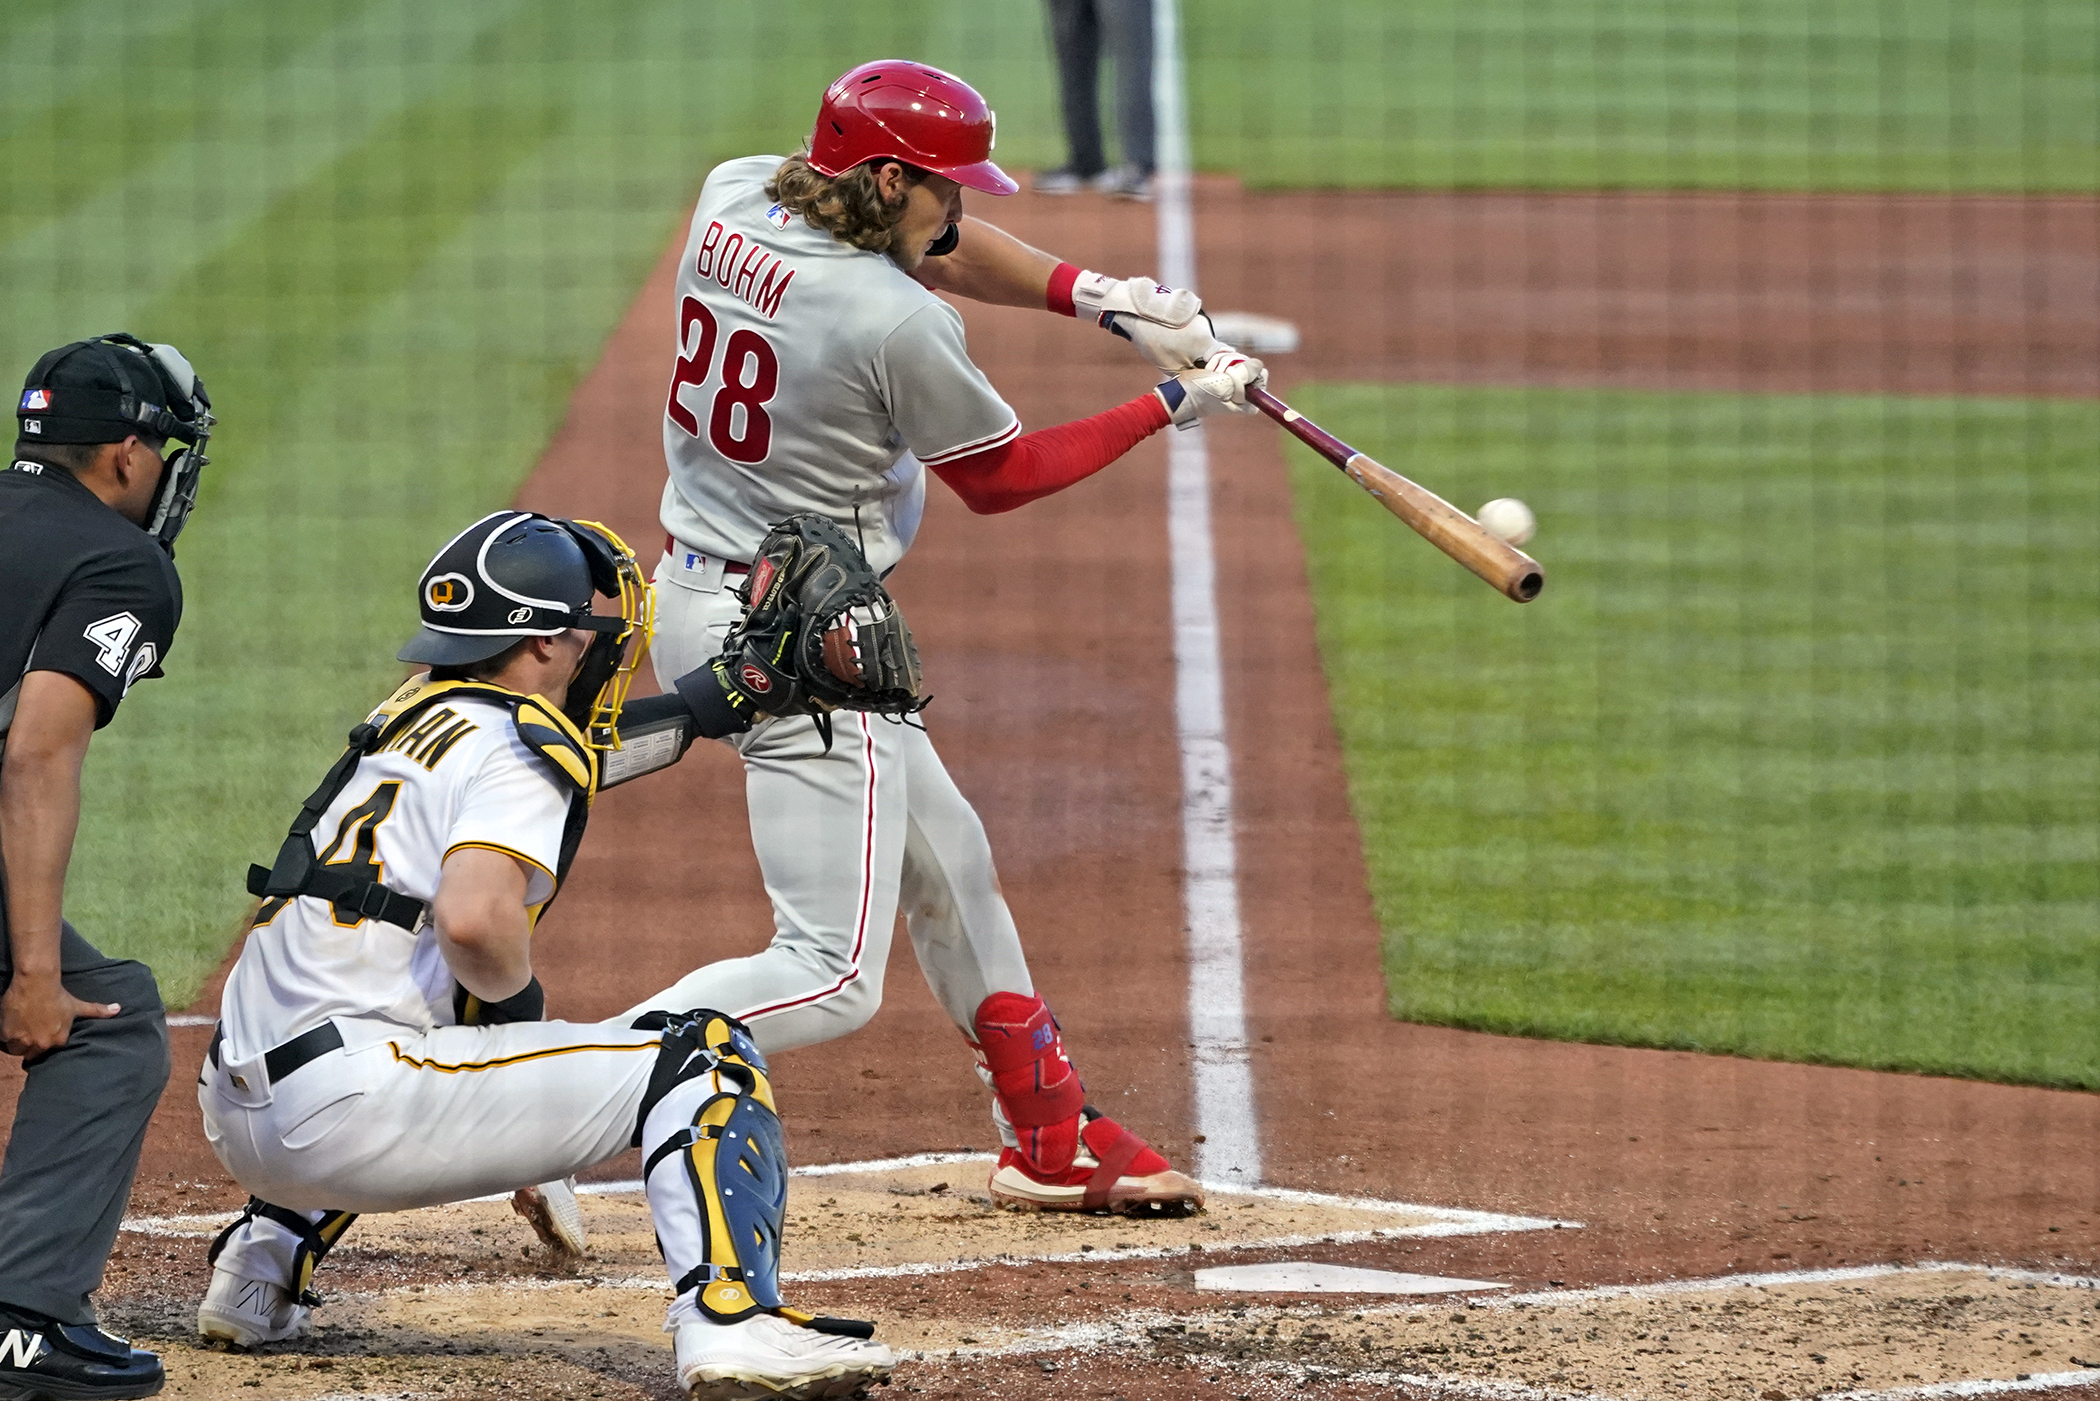 Philadelphia Phillies at Pittsburgh Pirates free live stream (7/29/22) How to watch, channel, time